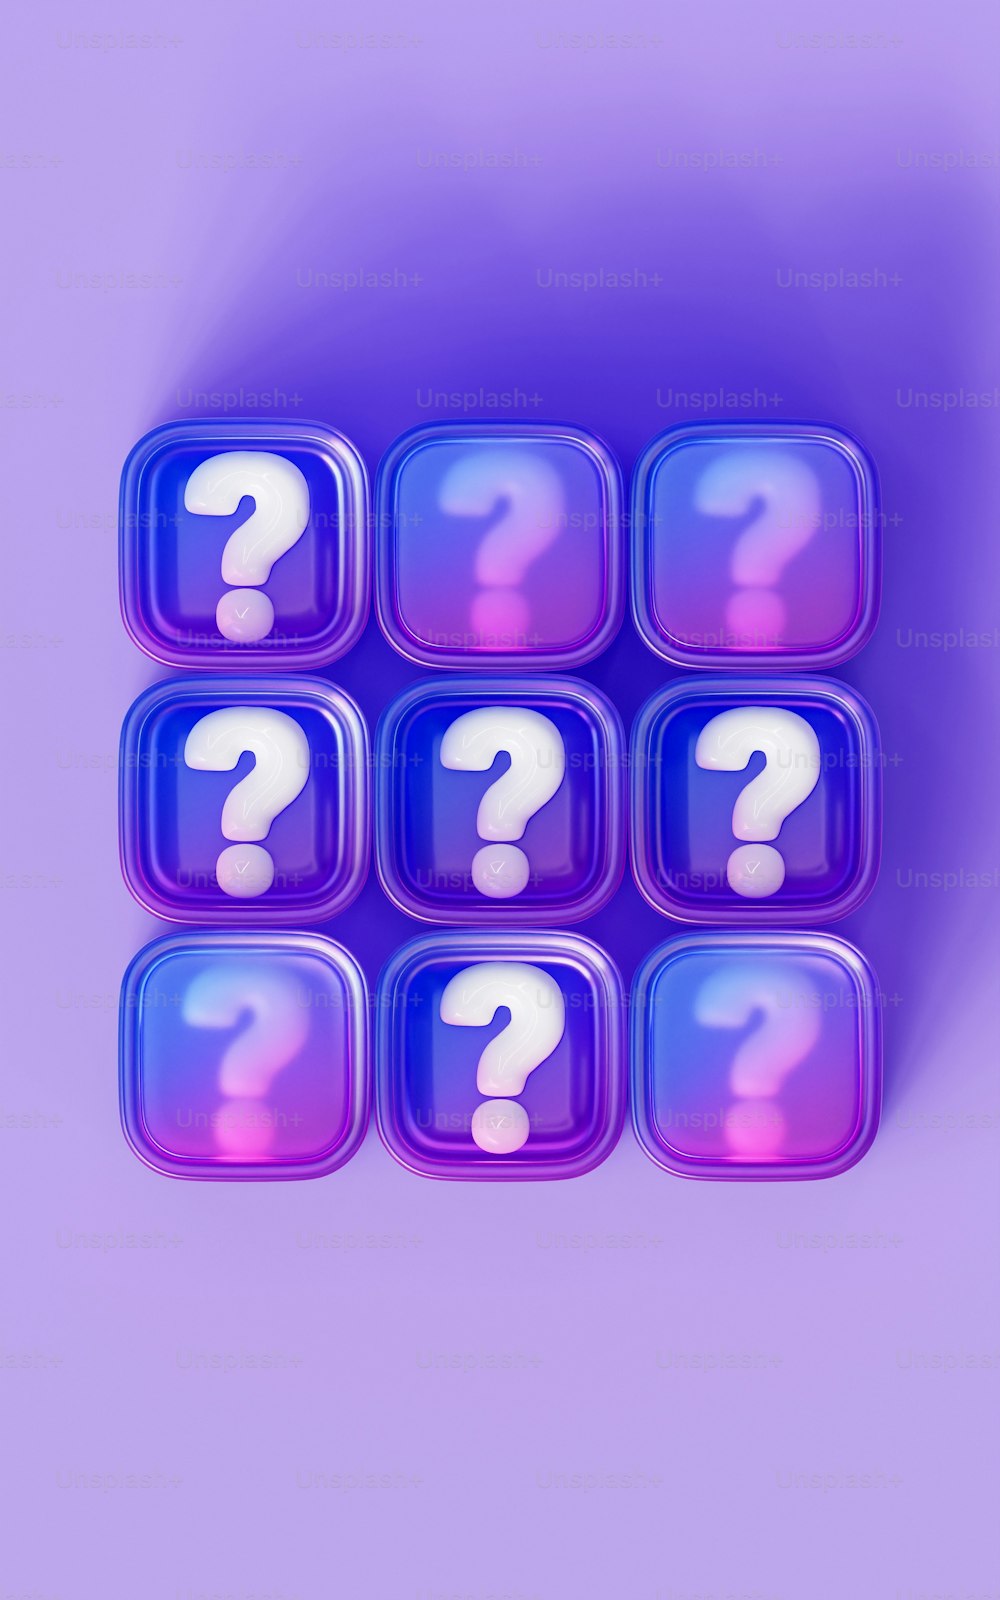 a bunch of question marks on a purple background